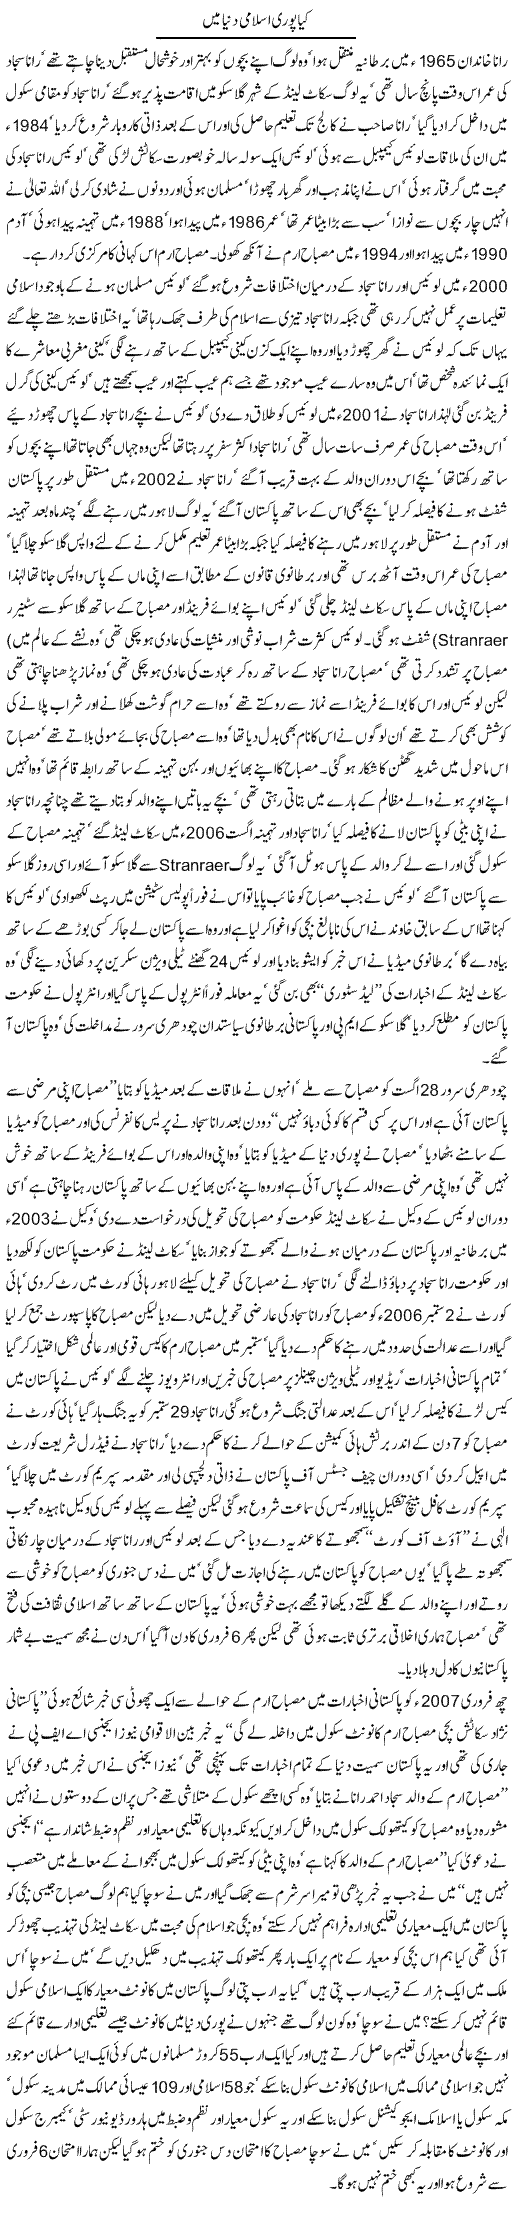 Whole Muslims World Express Column Javed Chaudhry 17 February 2011